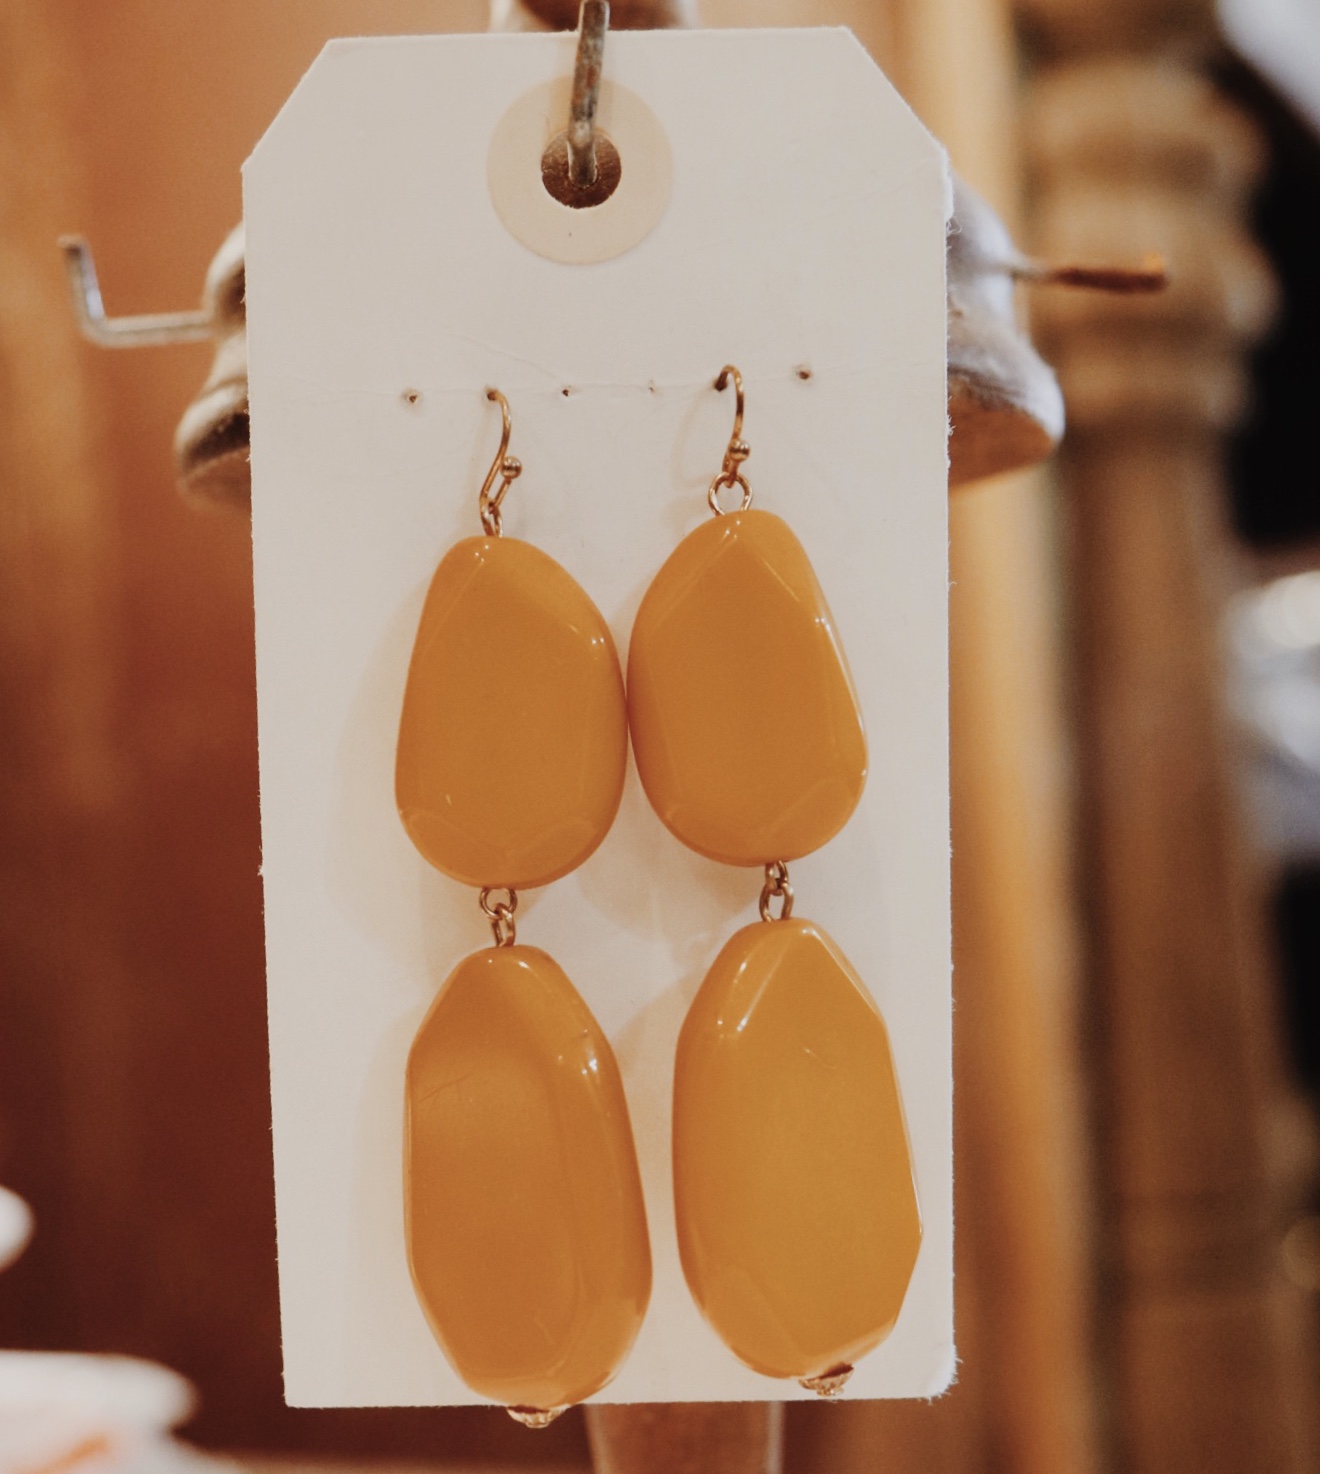 Mustard Stone Dangle Earrings, Measuring 3.5 inches long. They are lightwieght compared to how they look.